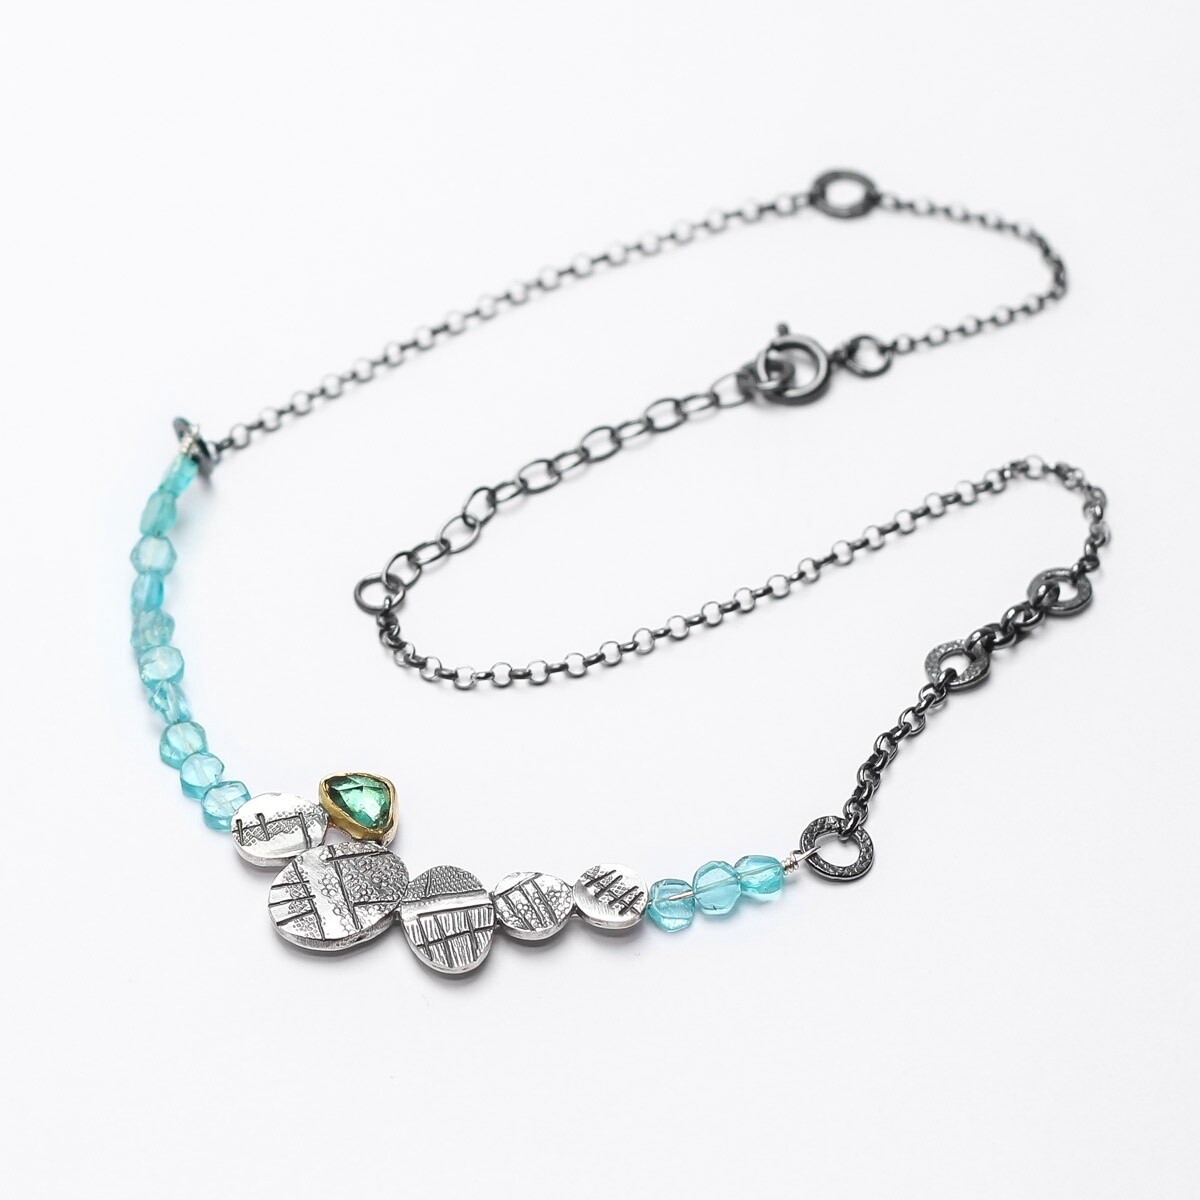 Statement pebbles, tourmaline and apatite necklace by Adele Taylor